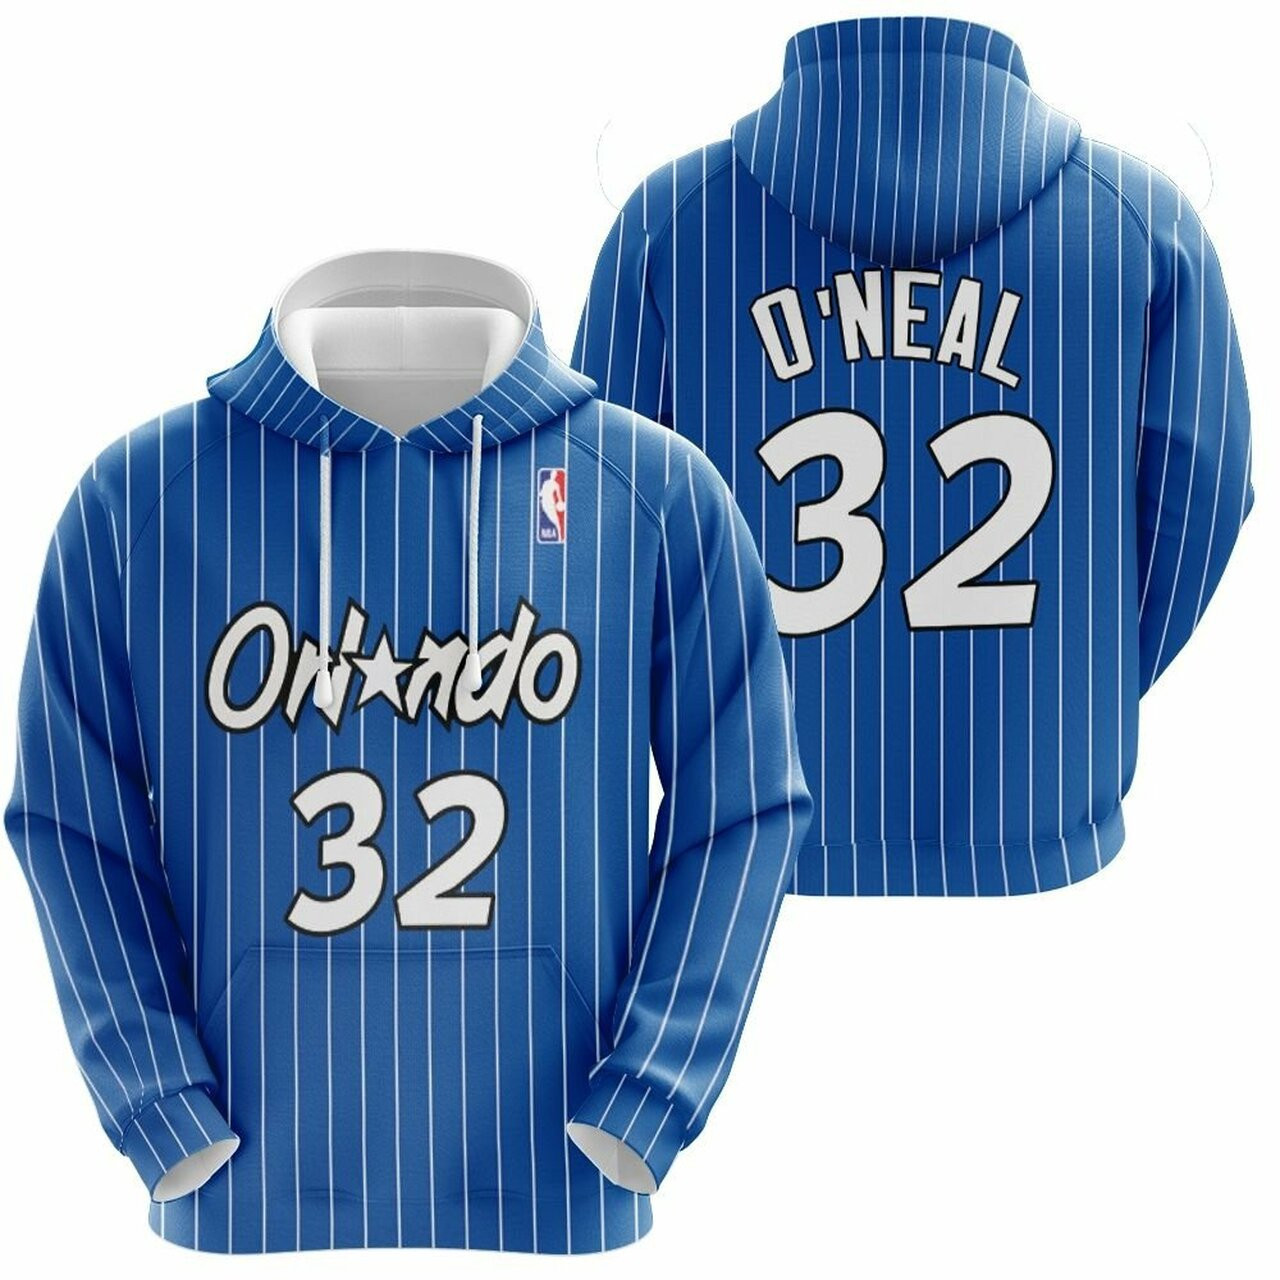 Orlando Magic Shaquille Oneal 32 Nba Basketball Blue 2019 Jersey Style Gift For Orlando Fans Hoodie